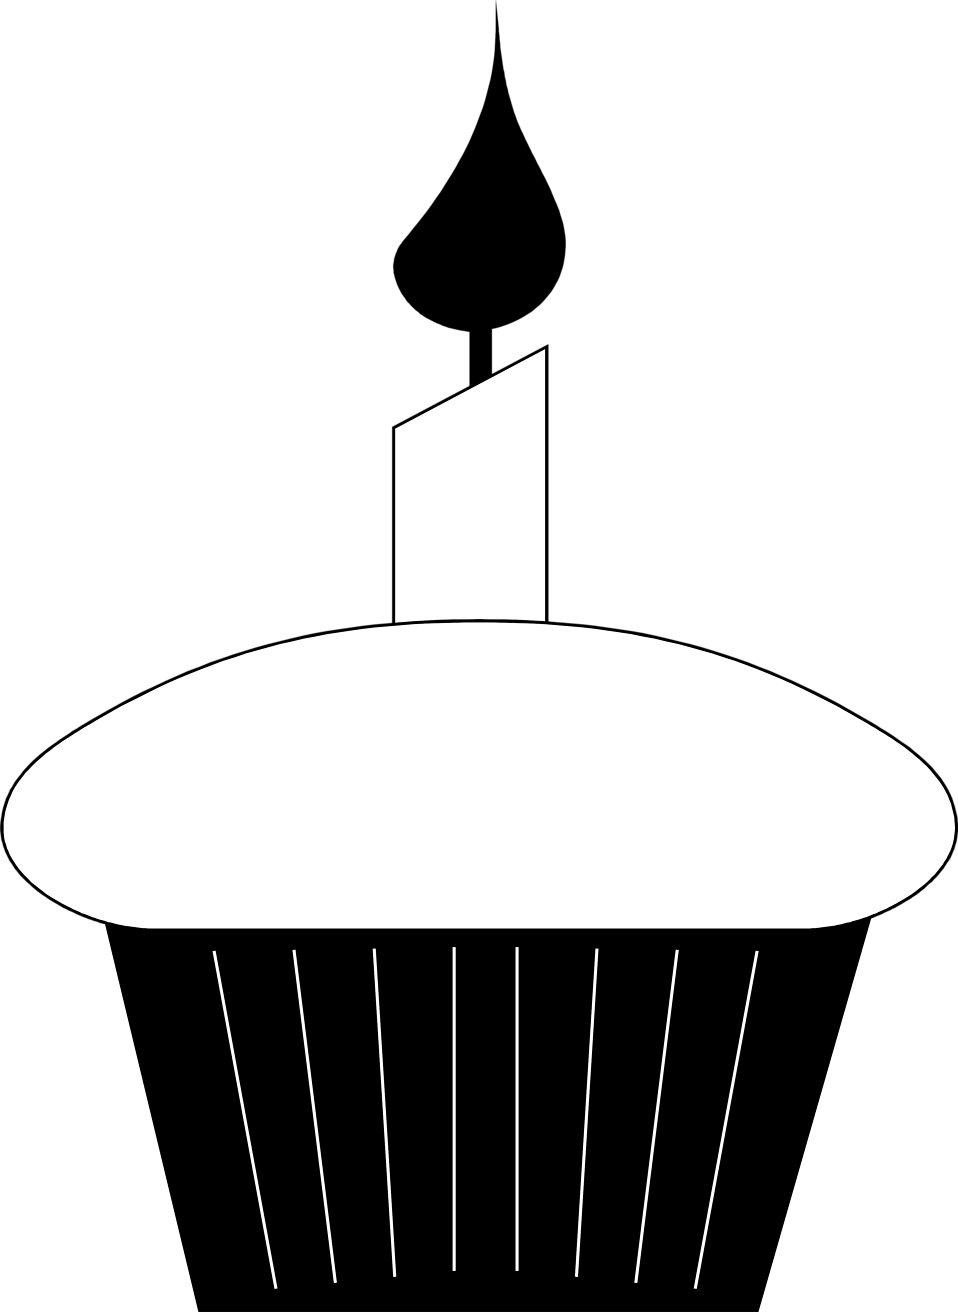 pictures of cupcakes clipart. Illustration of a cupcake with